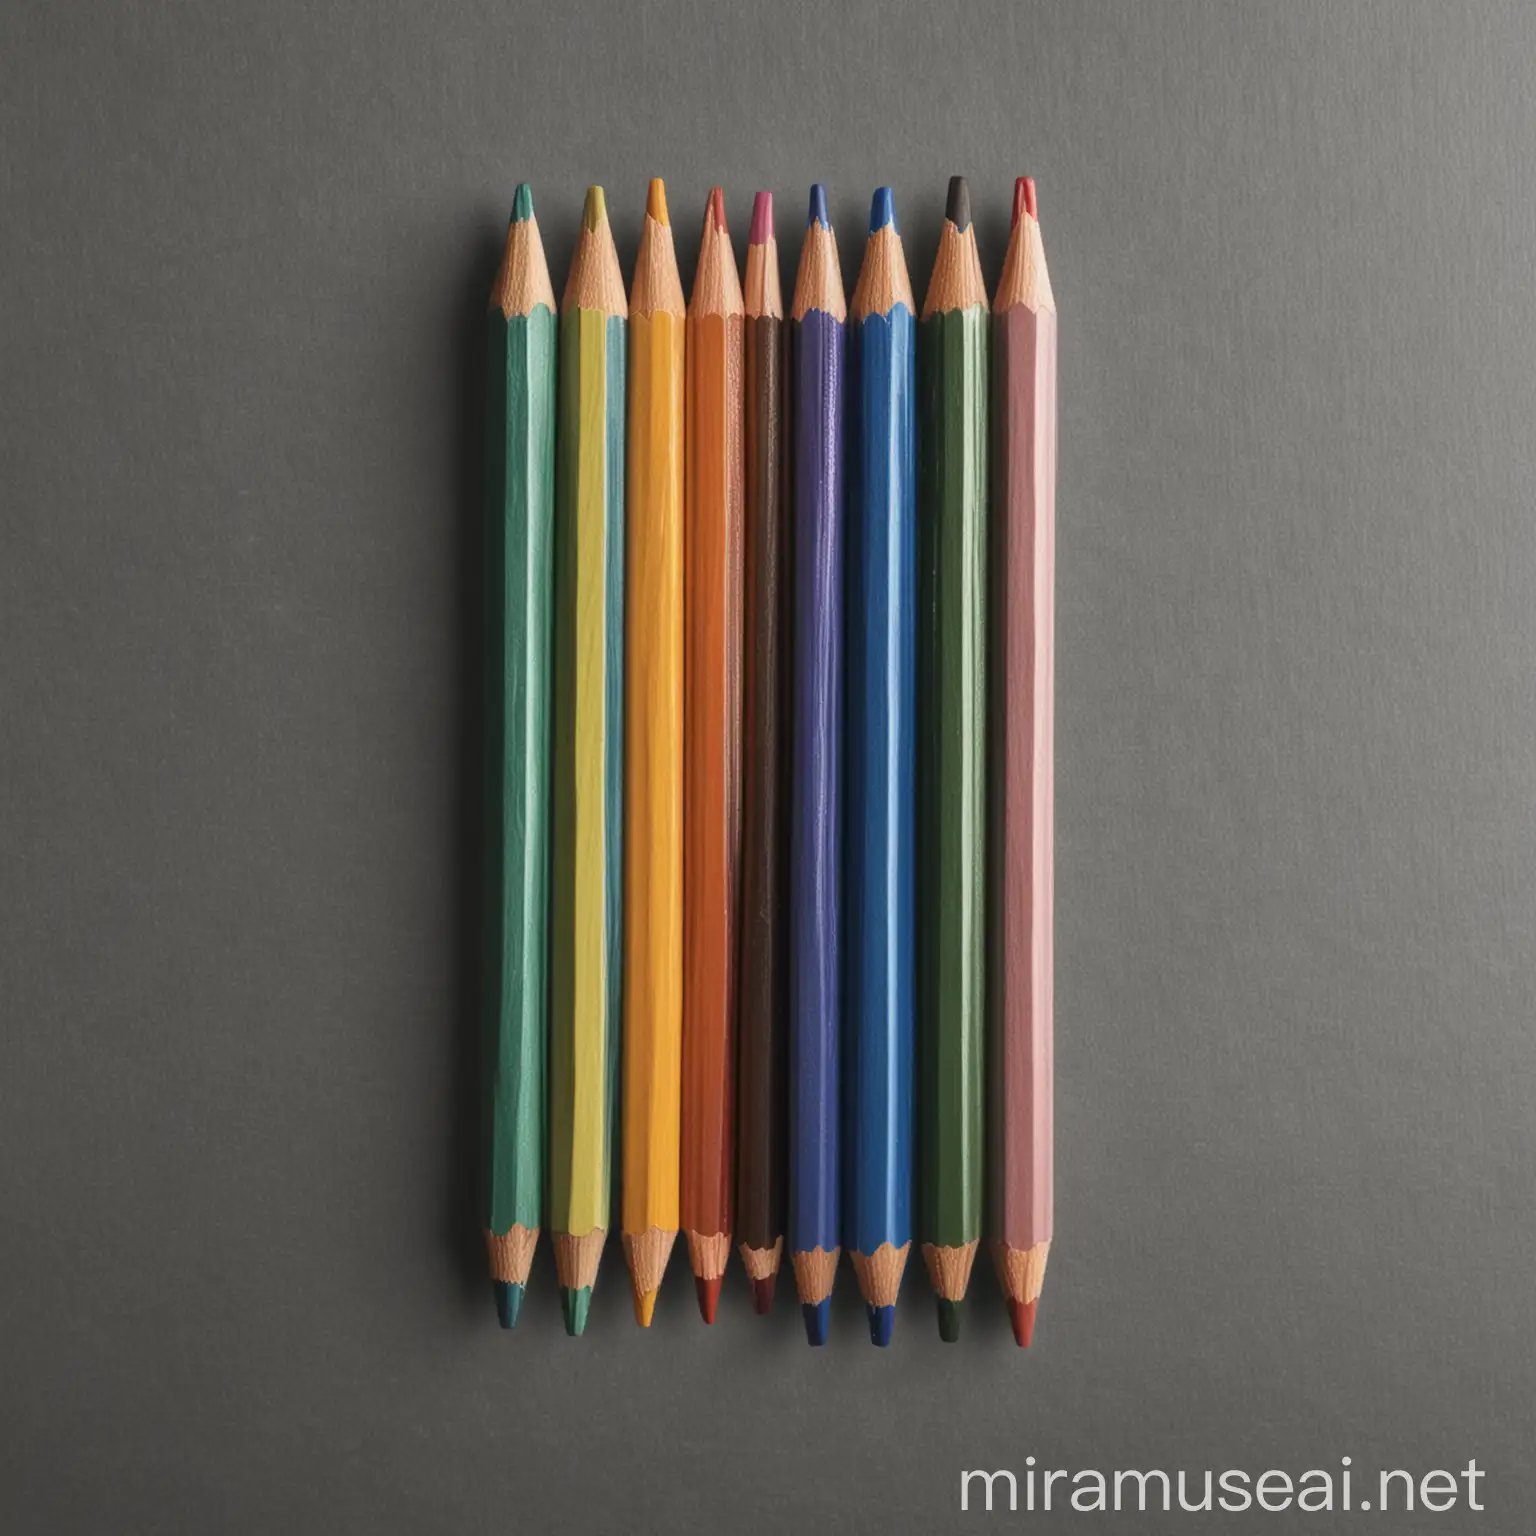 Six Colorful Pencils Arranged Vertically on White Background